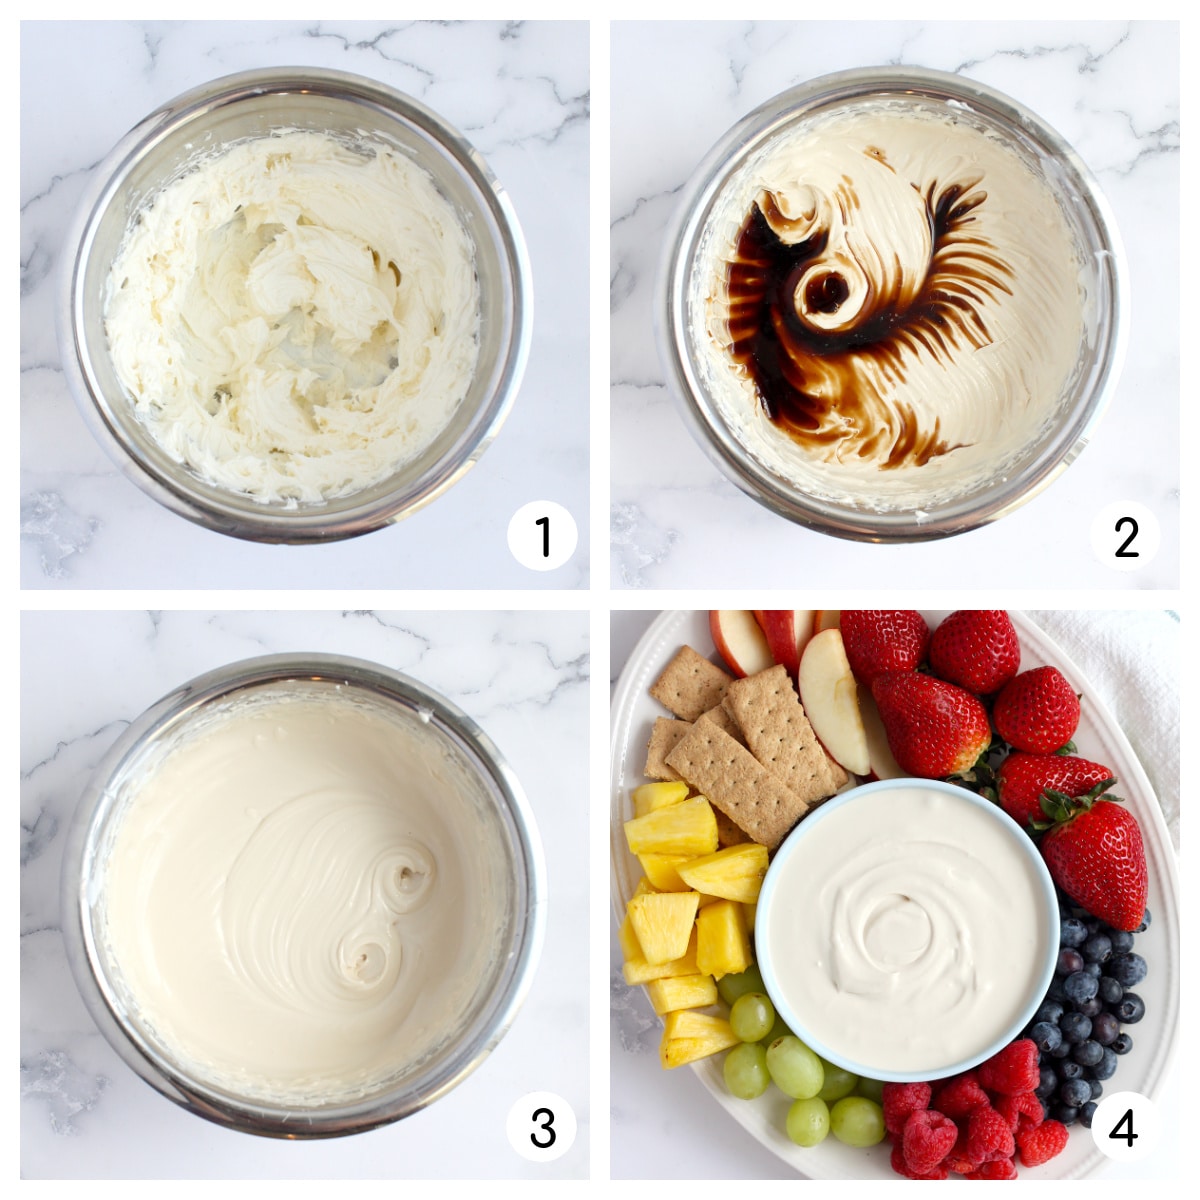 Process photos showing how to make cream cheese fruit dip.